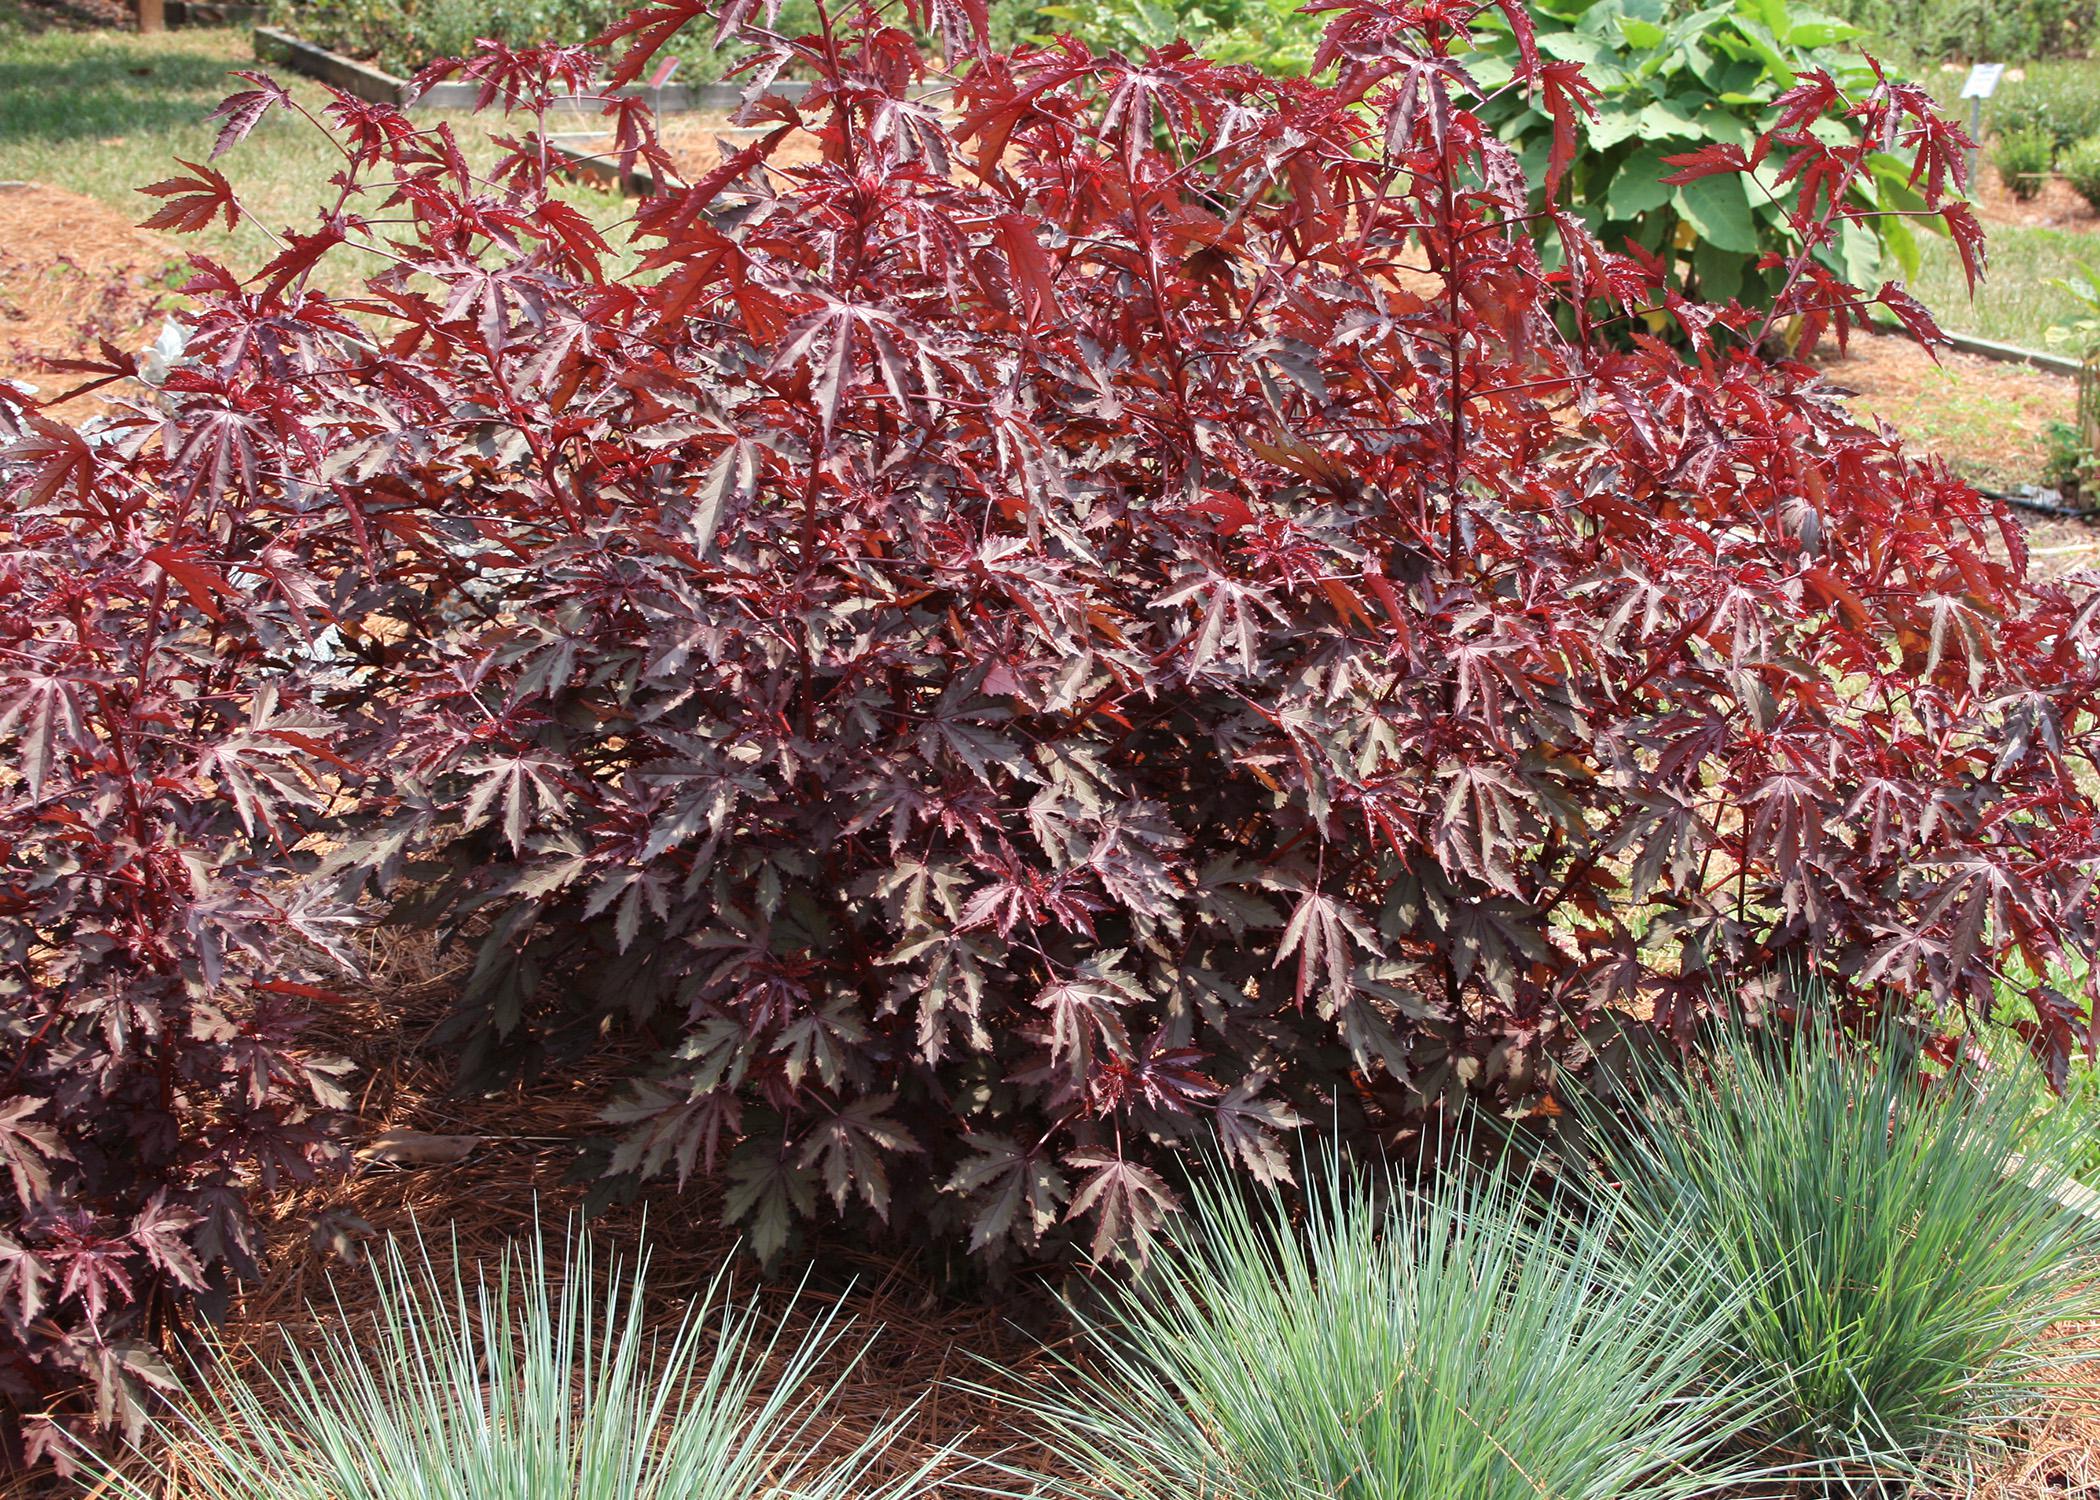 Mahogany Splendor hibiscus looks a lot like a Japanese maple. Leaves are either a dramatic, dark purplish-burgundy or a rusty, intense green, depending on sun and shade. (Photo by MSU Extension Service/Gary Bachman)